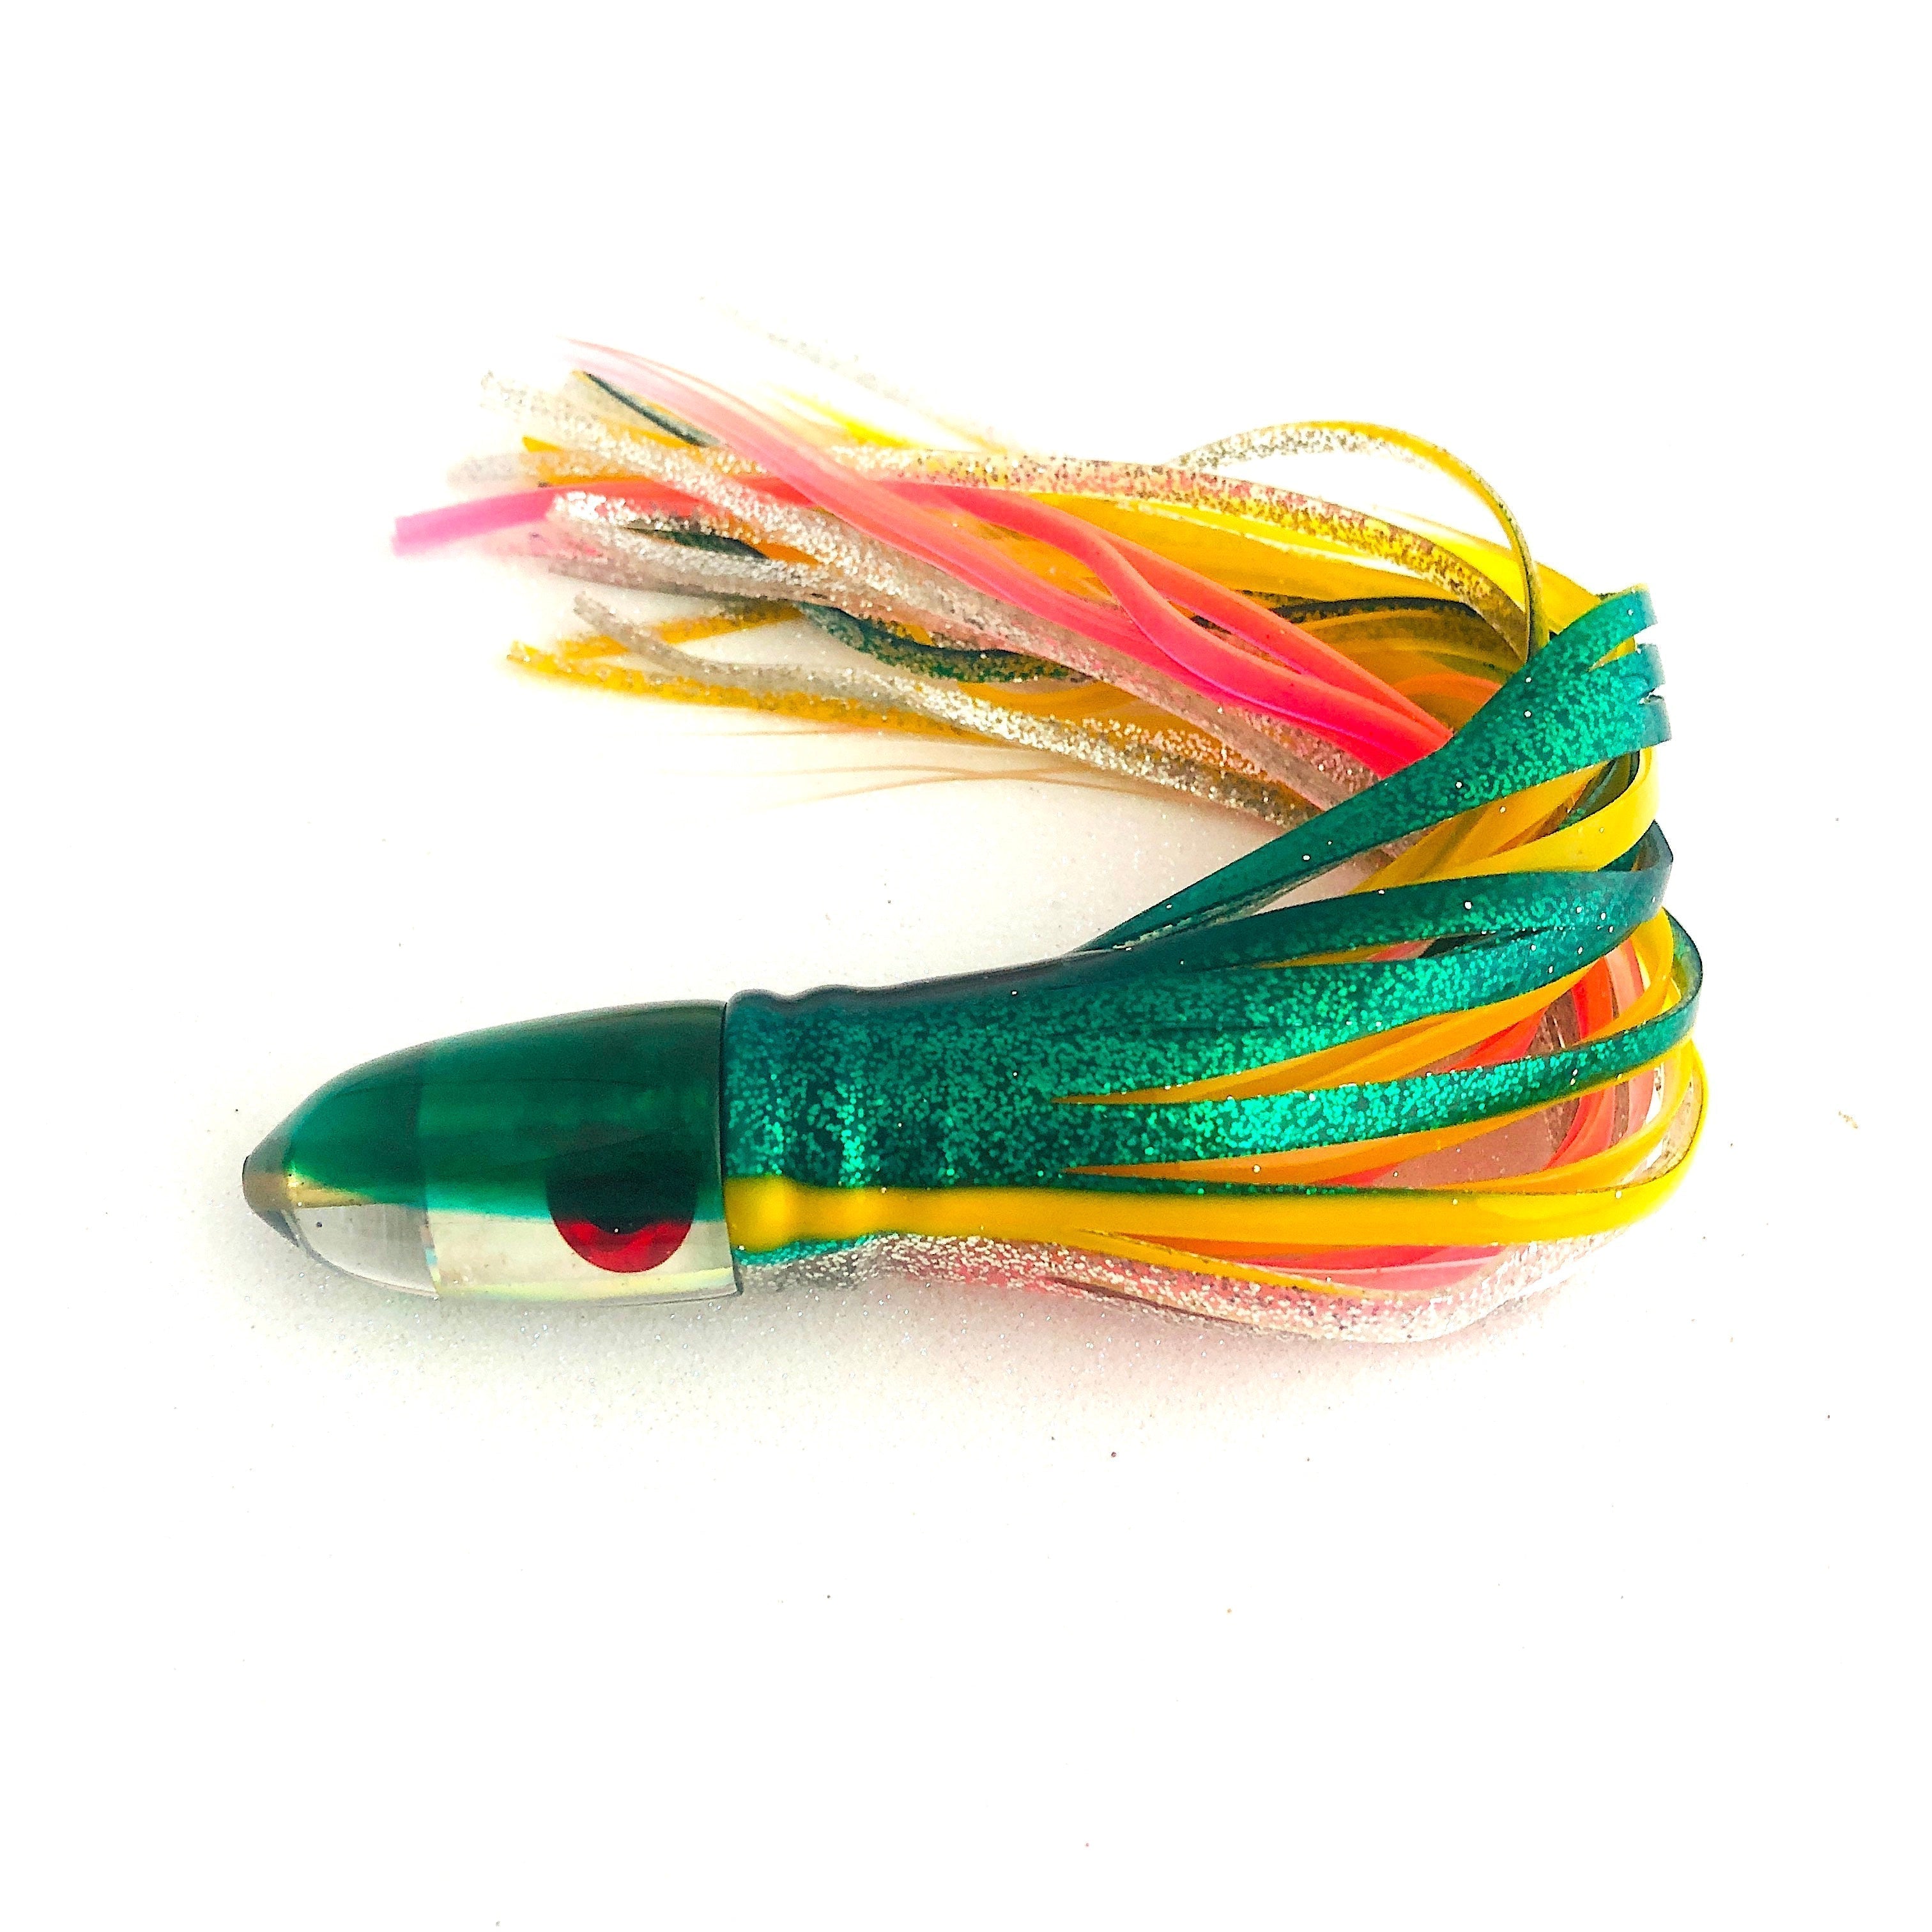 RESTOCK! The 9 Bullet Baby Bomb by Bomboy Lures Skirted- New